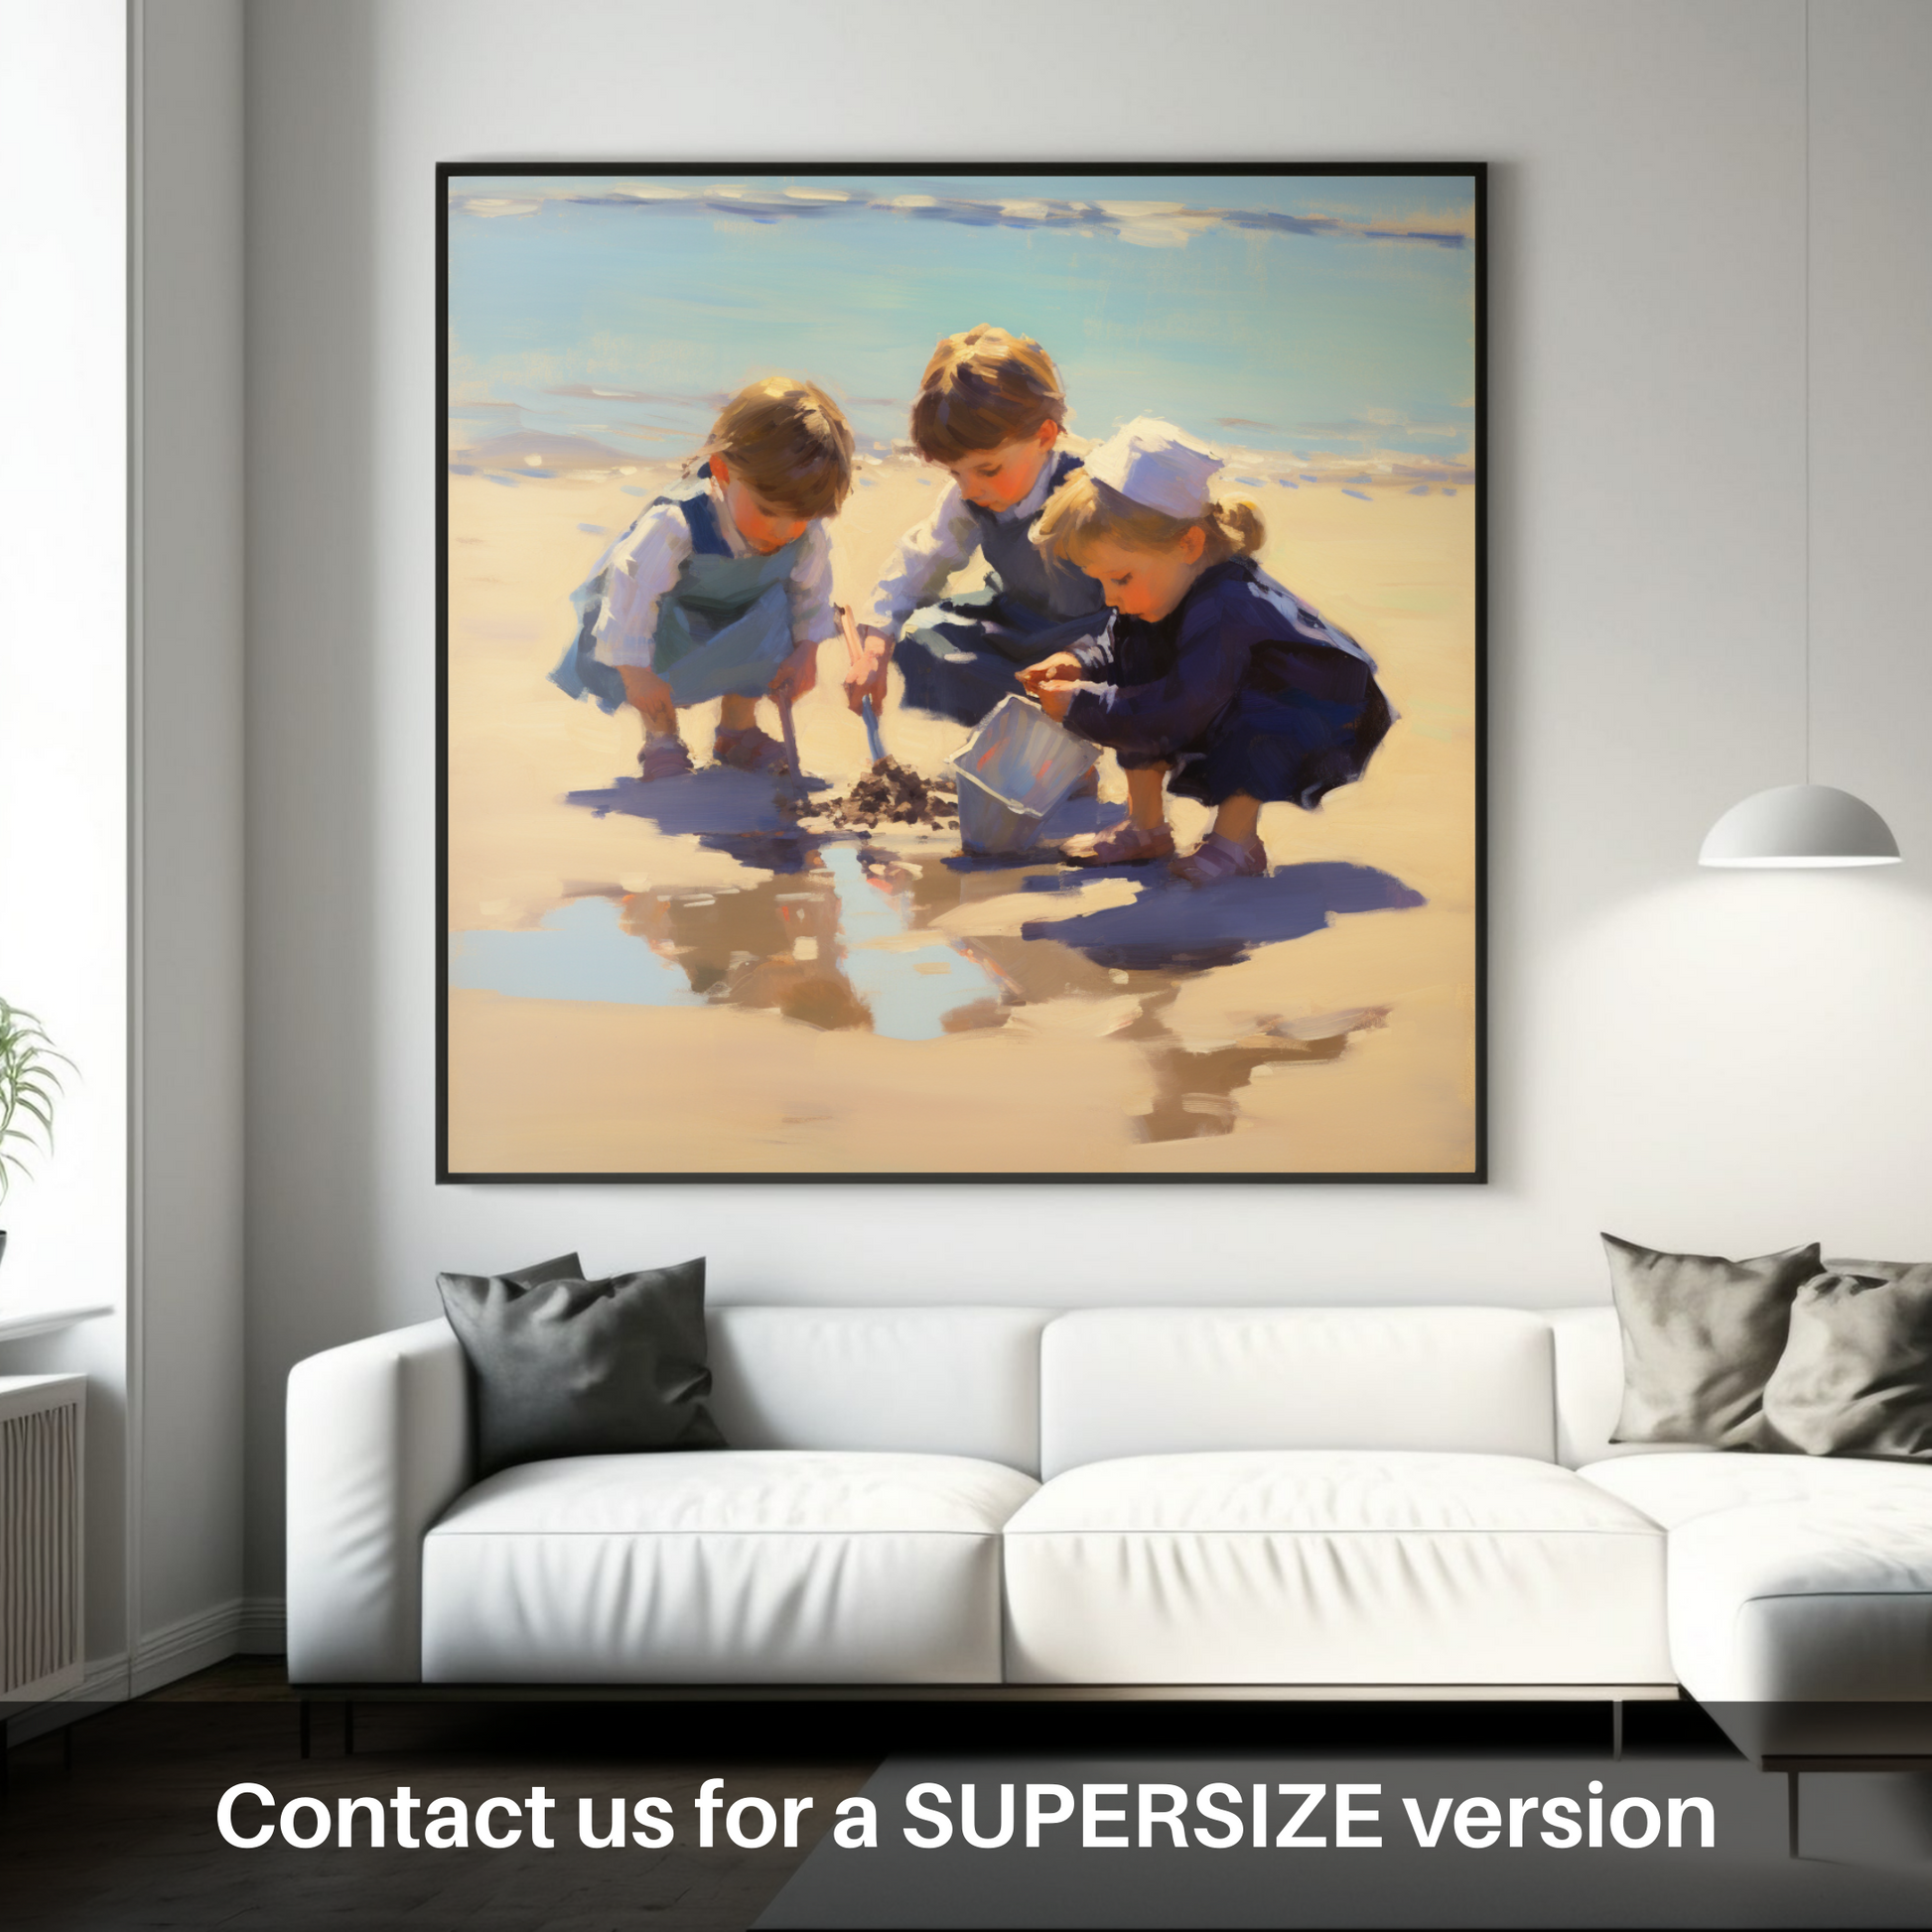 Huge supersize print of Three children digging in the sand at St. Andrews Beach